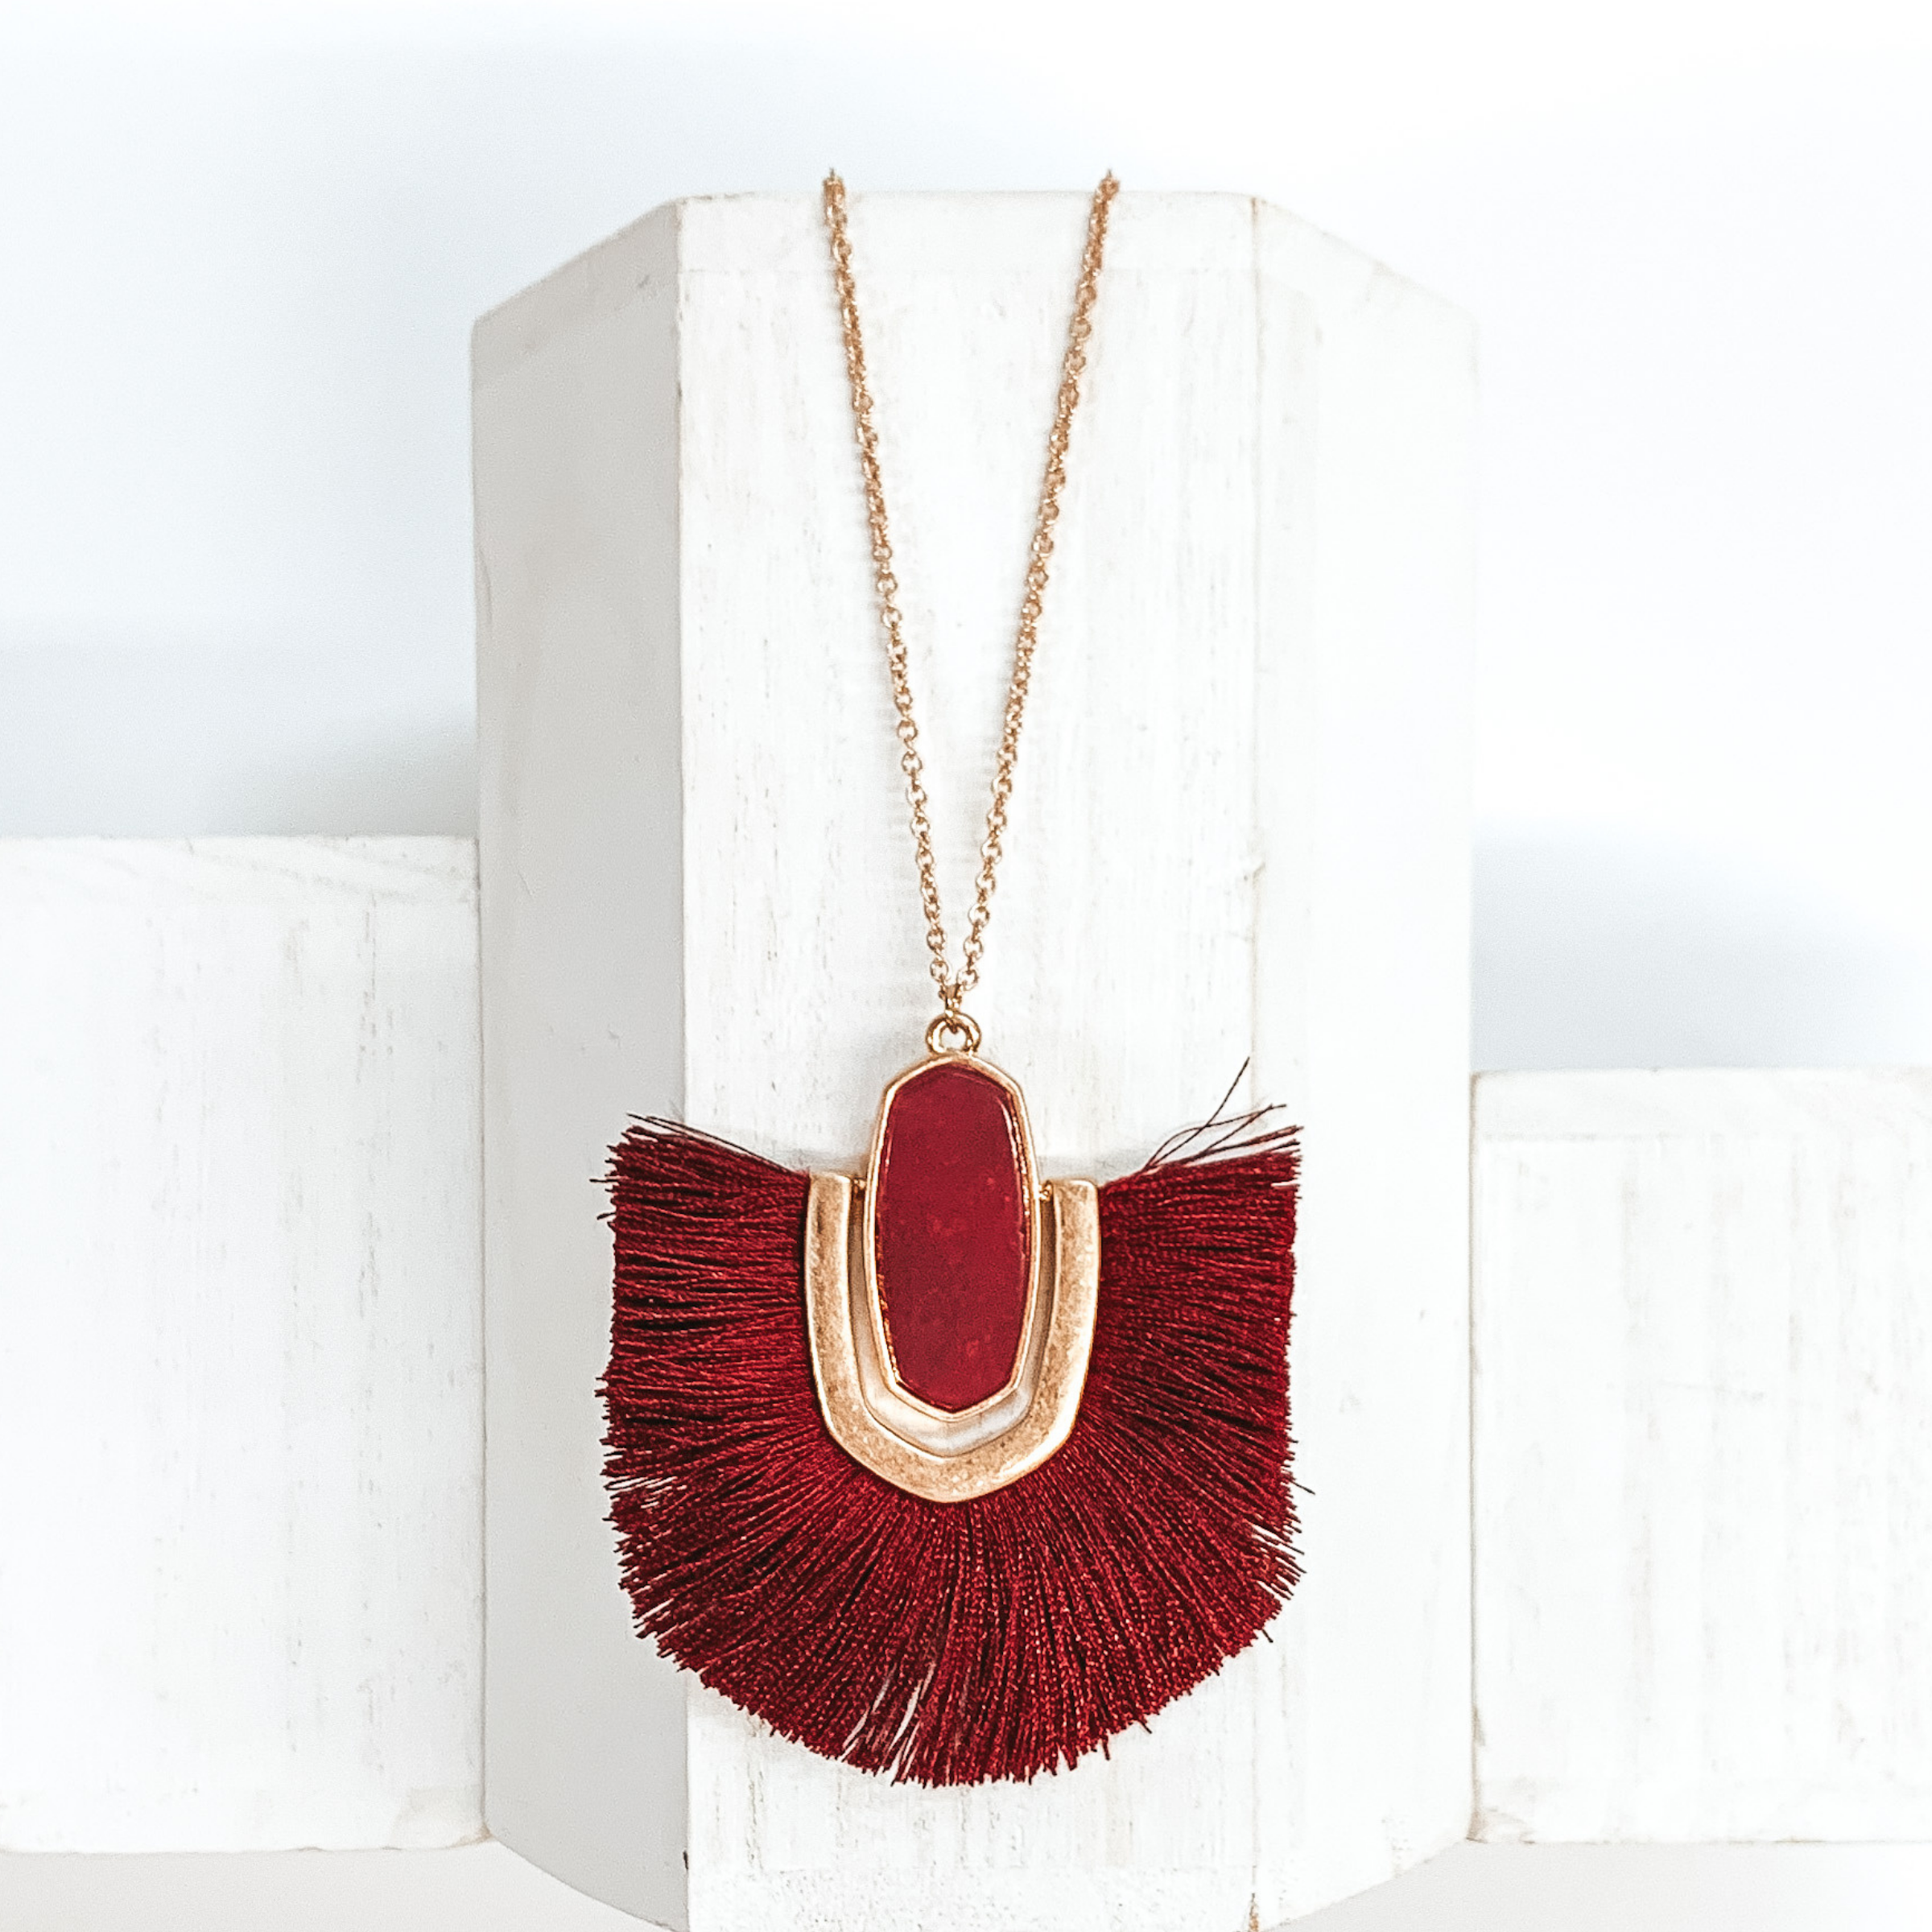 Thin, gold chained necklace with an oval shaped red stone pendant that has a half oval gold accent connected at the sides that inlcudes dark red fringe. This necklace is pictured on a white block on a white background.